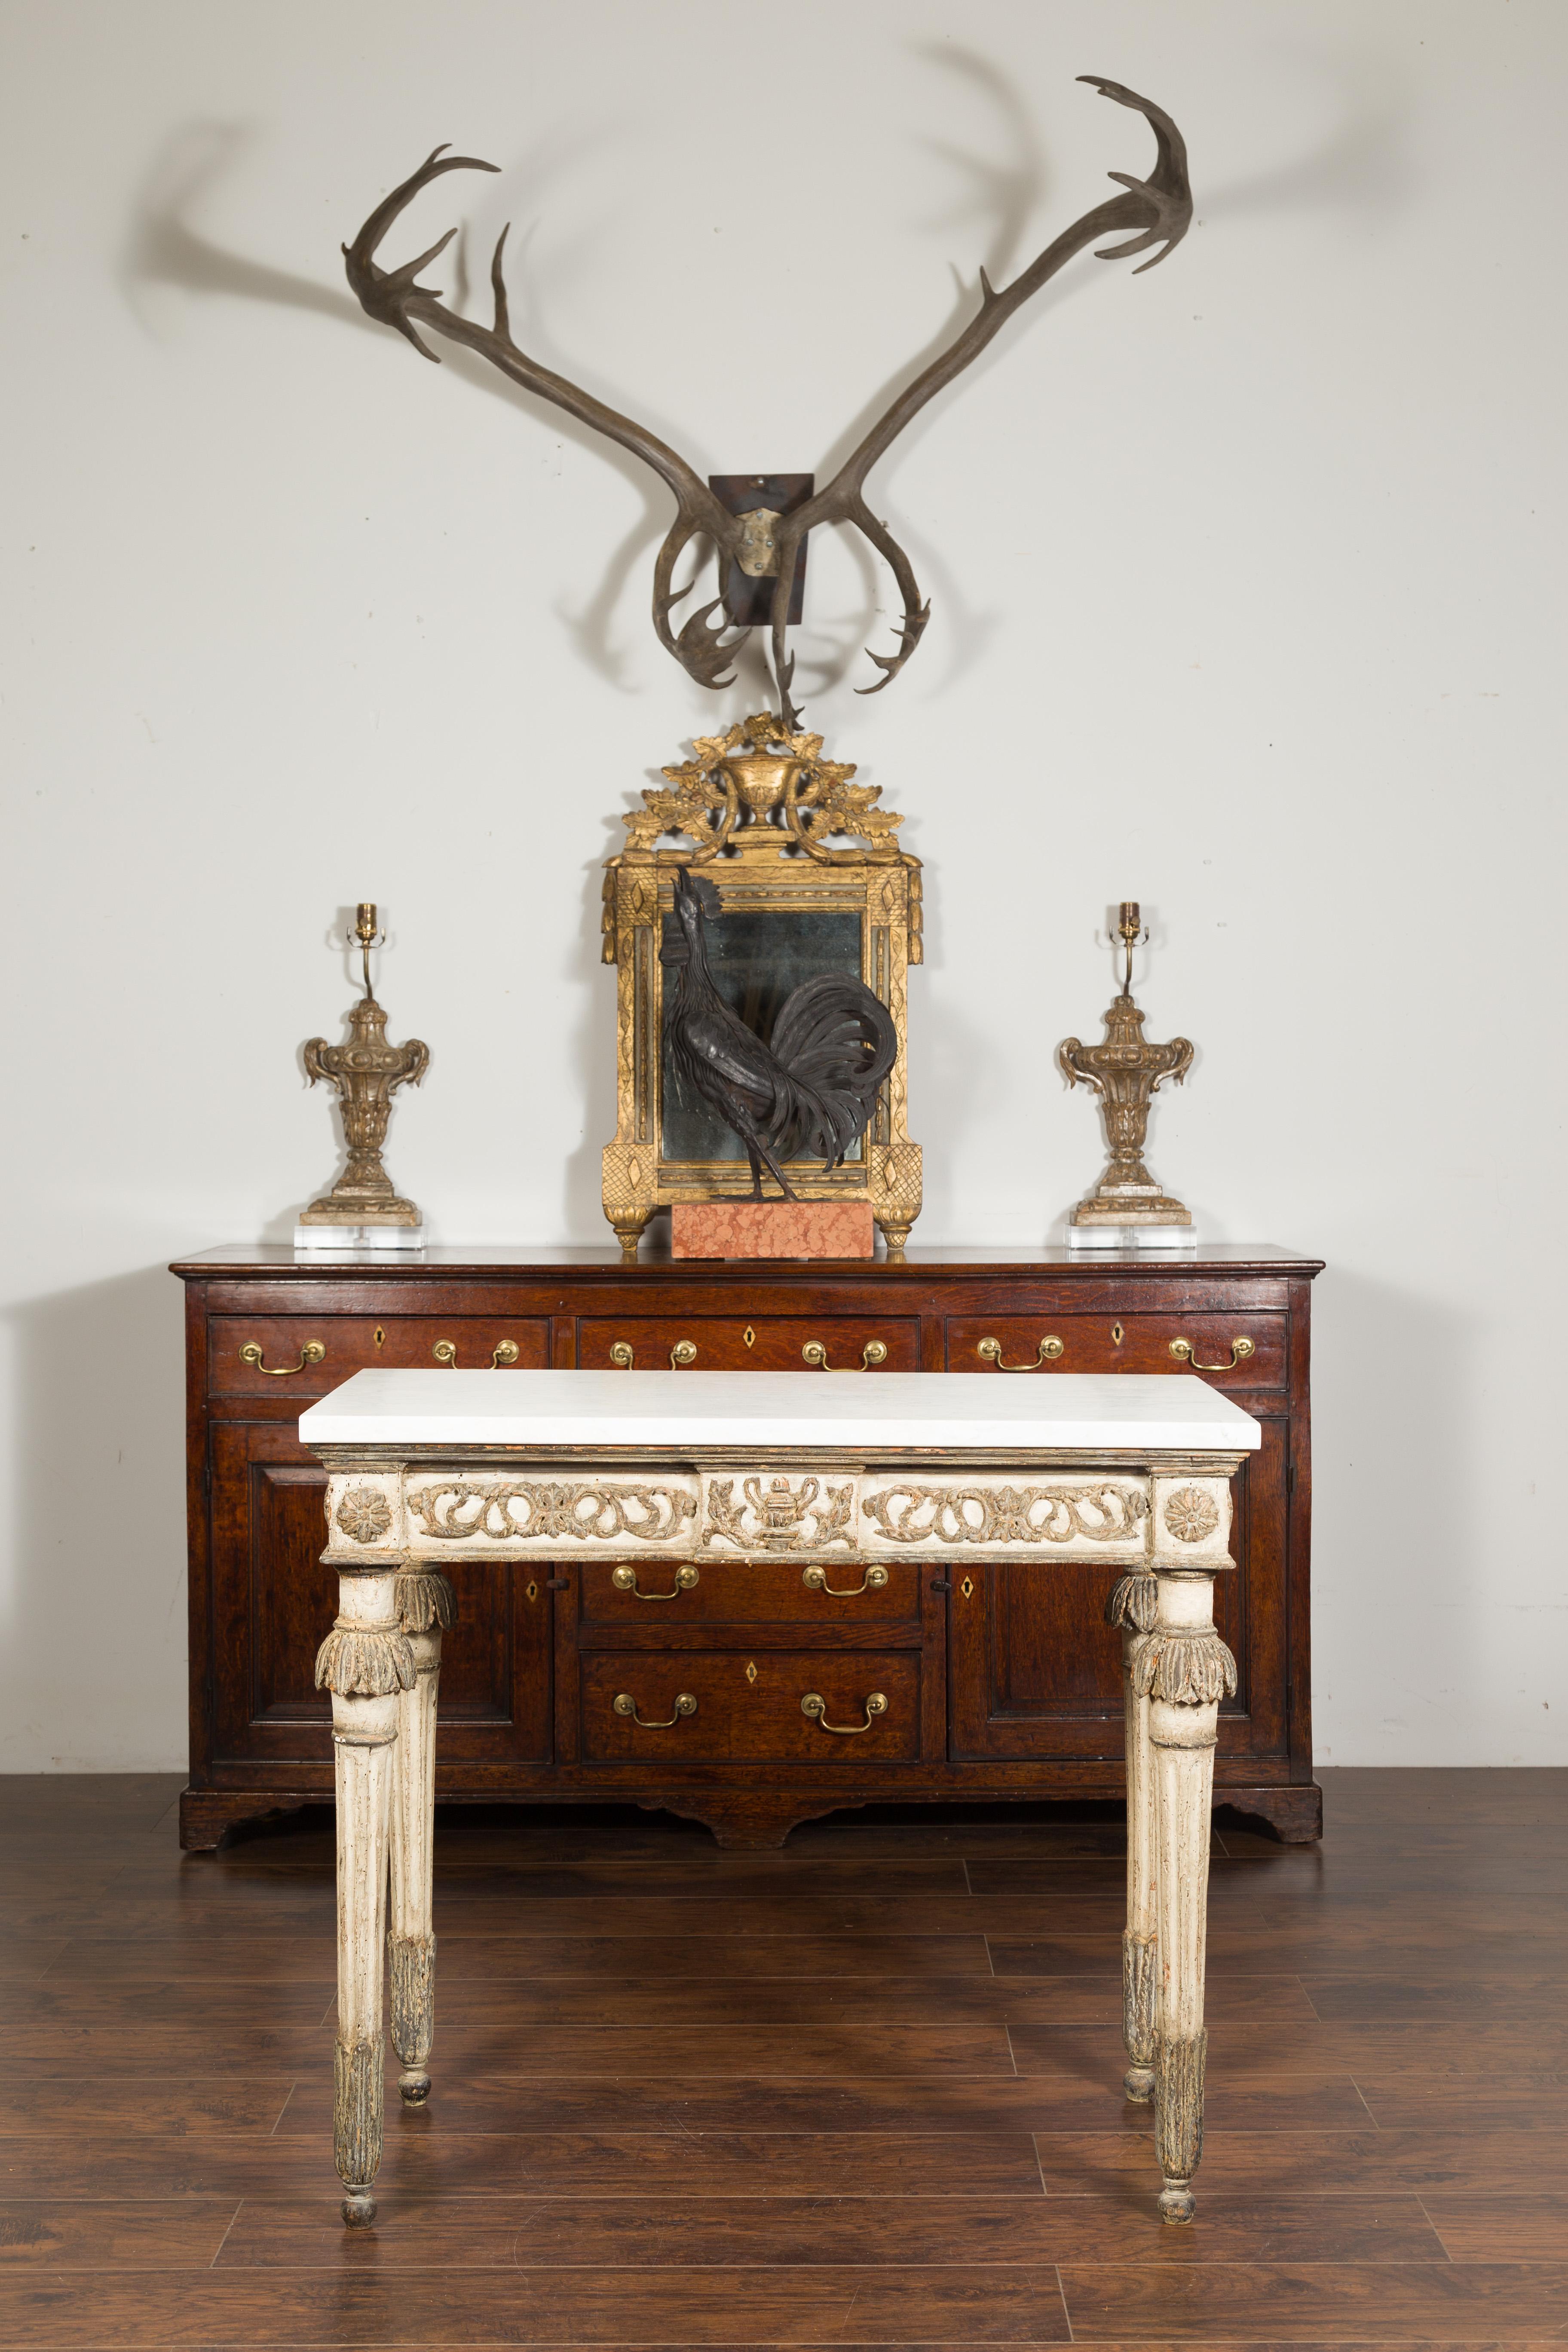 A French neoclassical period painted wood console table from the early 19th century, with white marble top, carved frieze and fluted legs. Created in France during the early years of the 19th century, this neoclassical console table features a